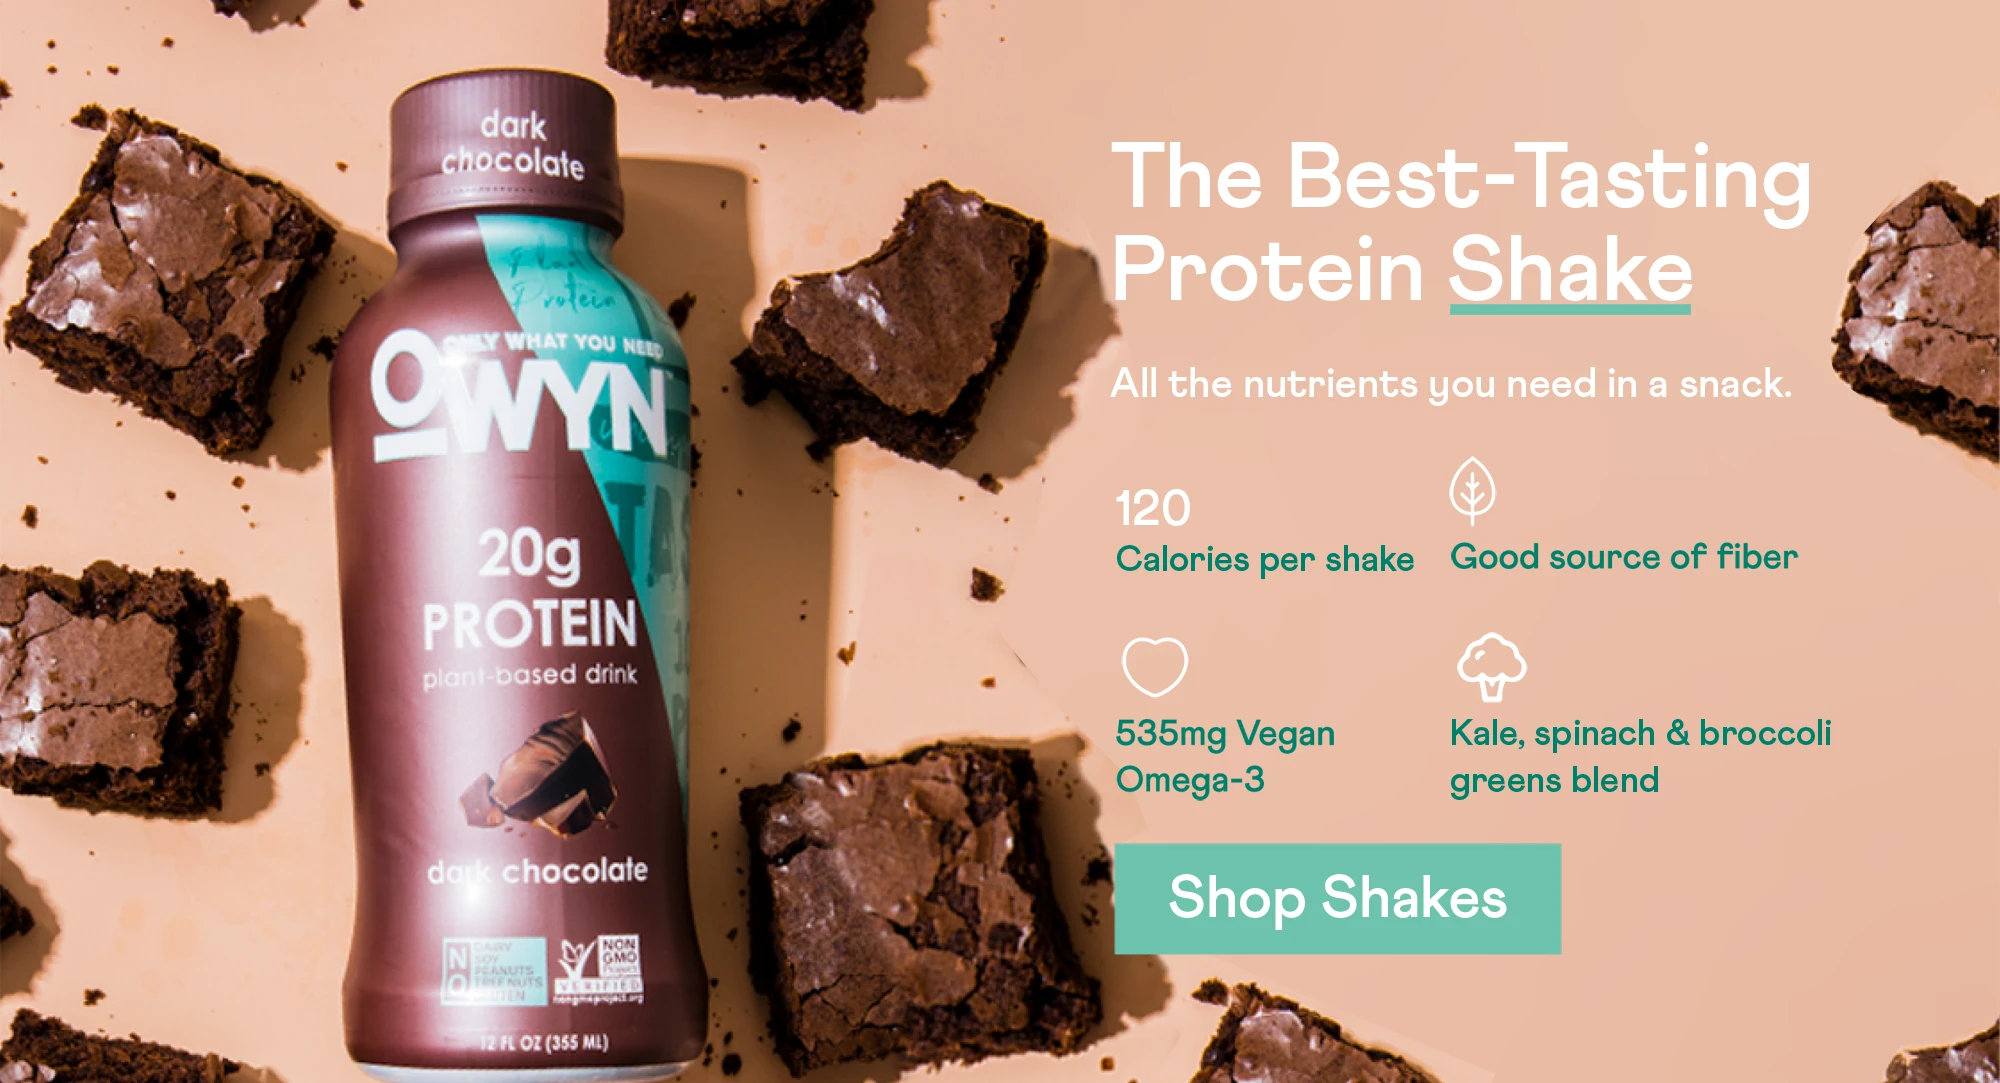 The best tasting protein shake